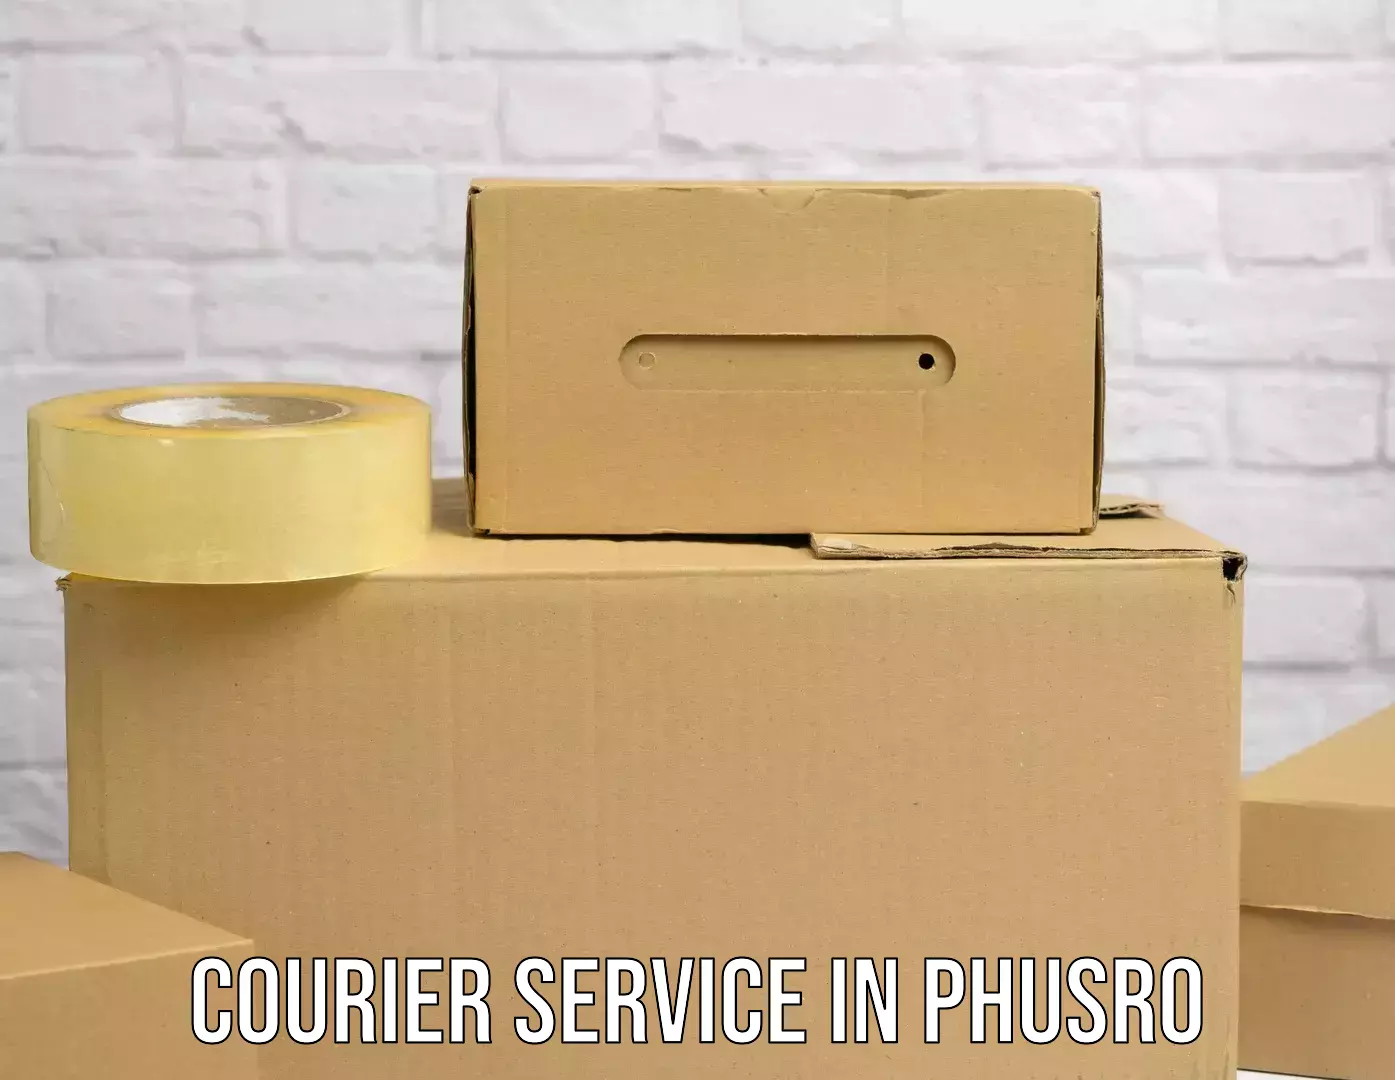 On-call courier service in Phusro